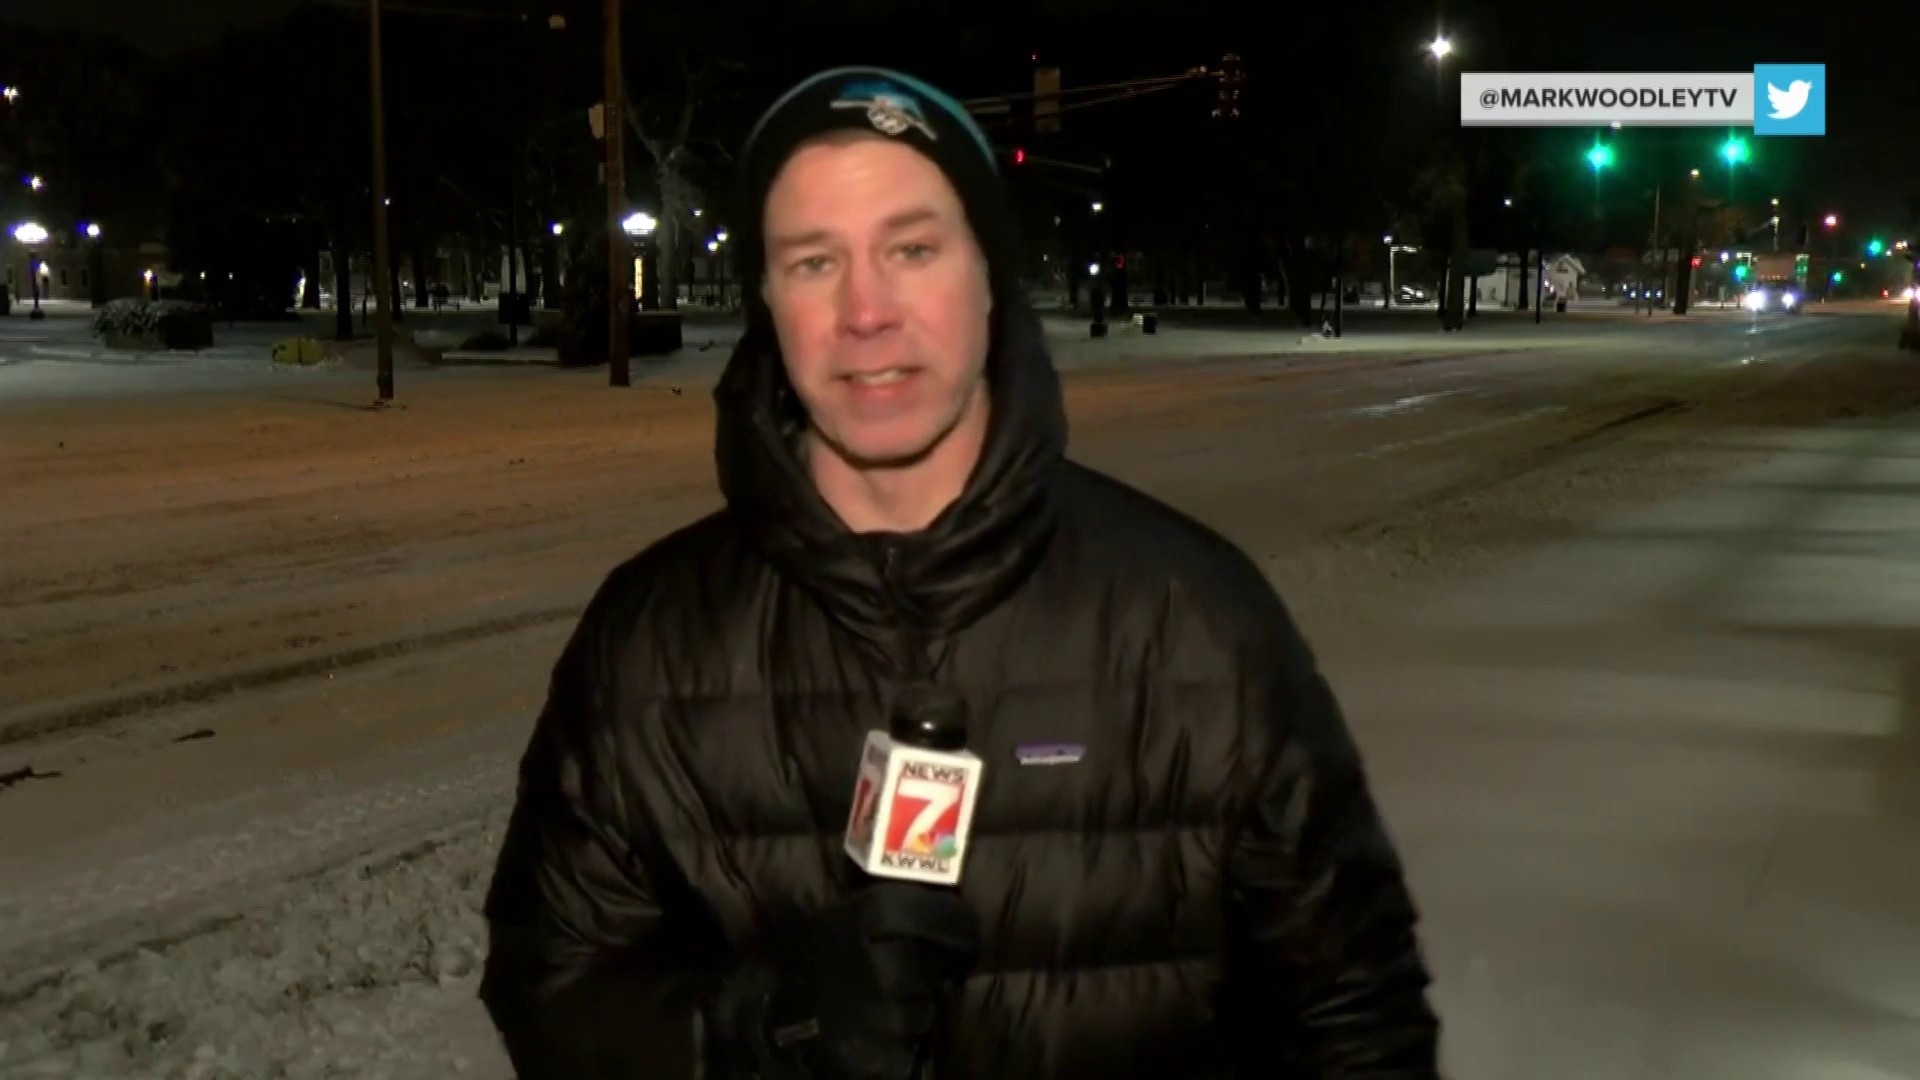 Iowa Sports Reporter Mark Woodley's Weather Coverage Goes Viral